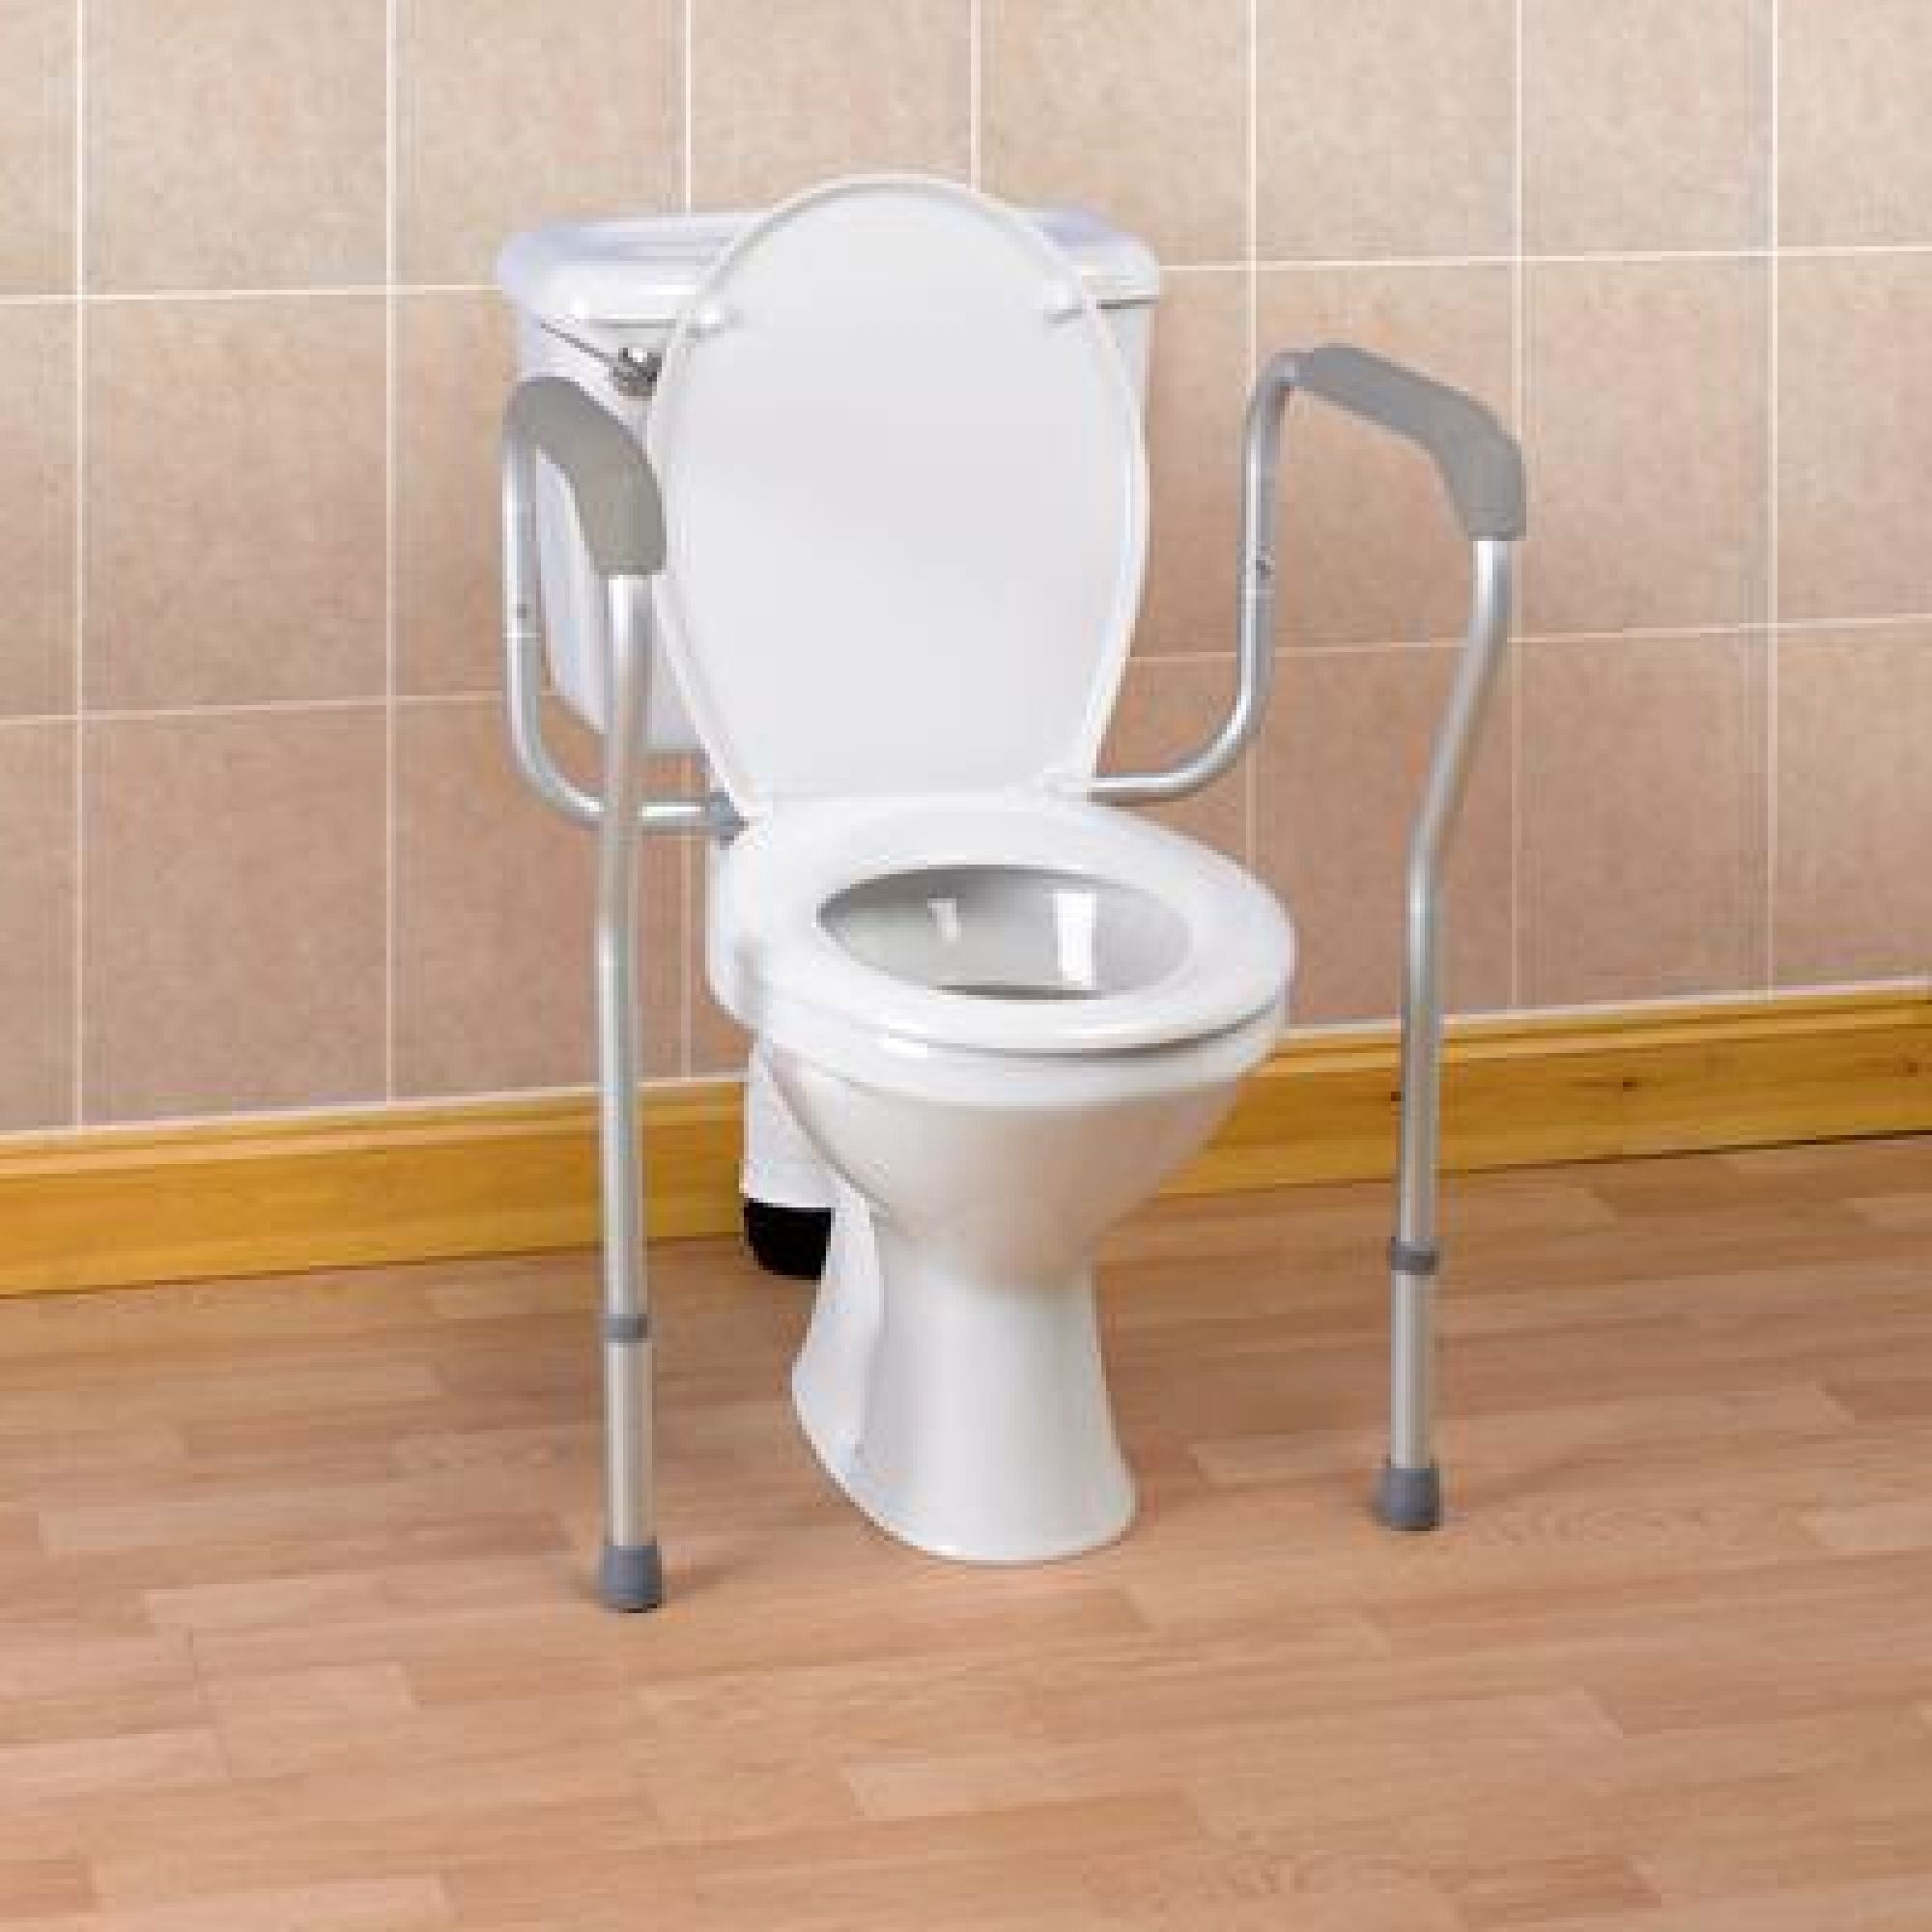 Performance Health Toilet Safety Frame 091078872 – Aline Mobility